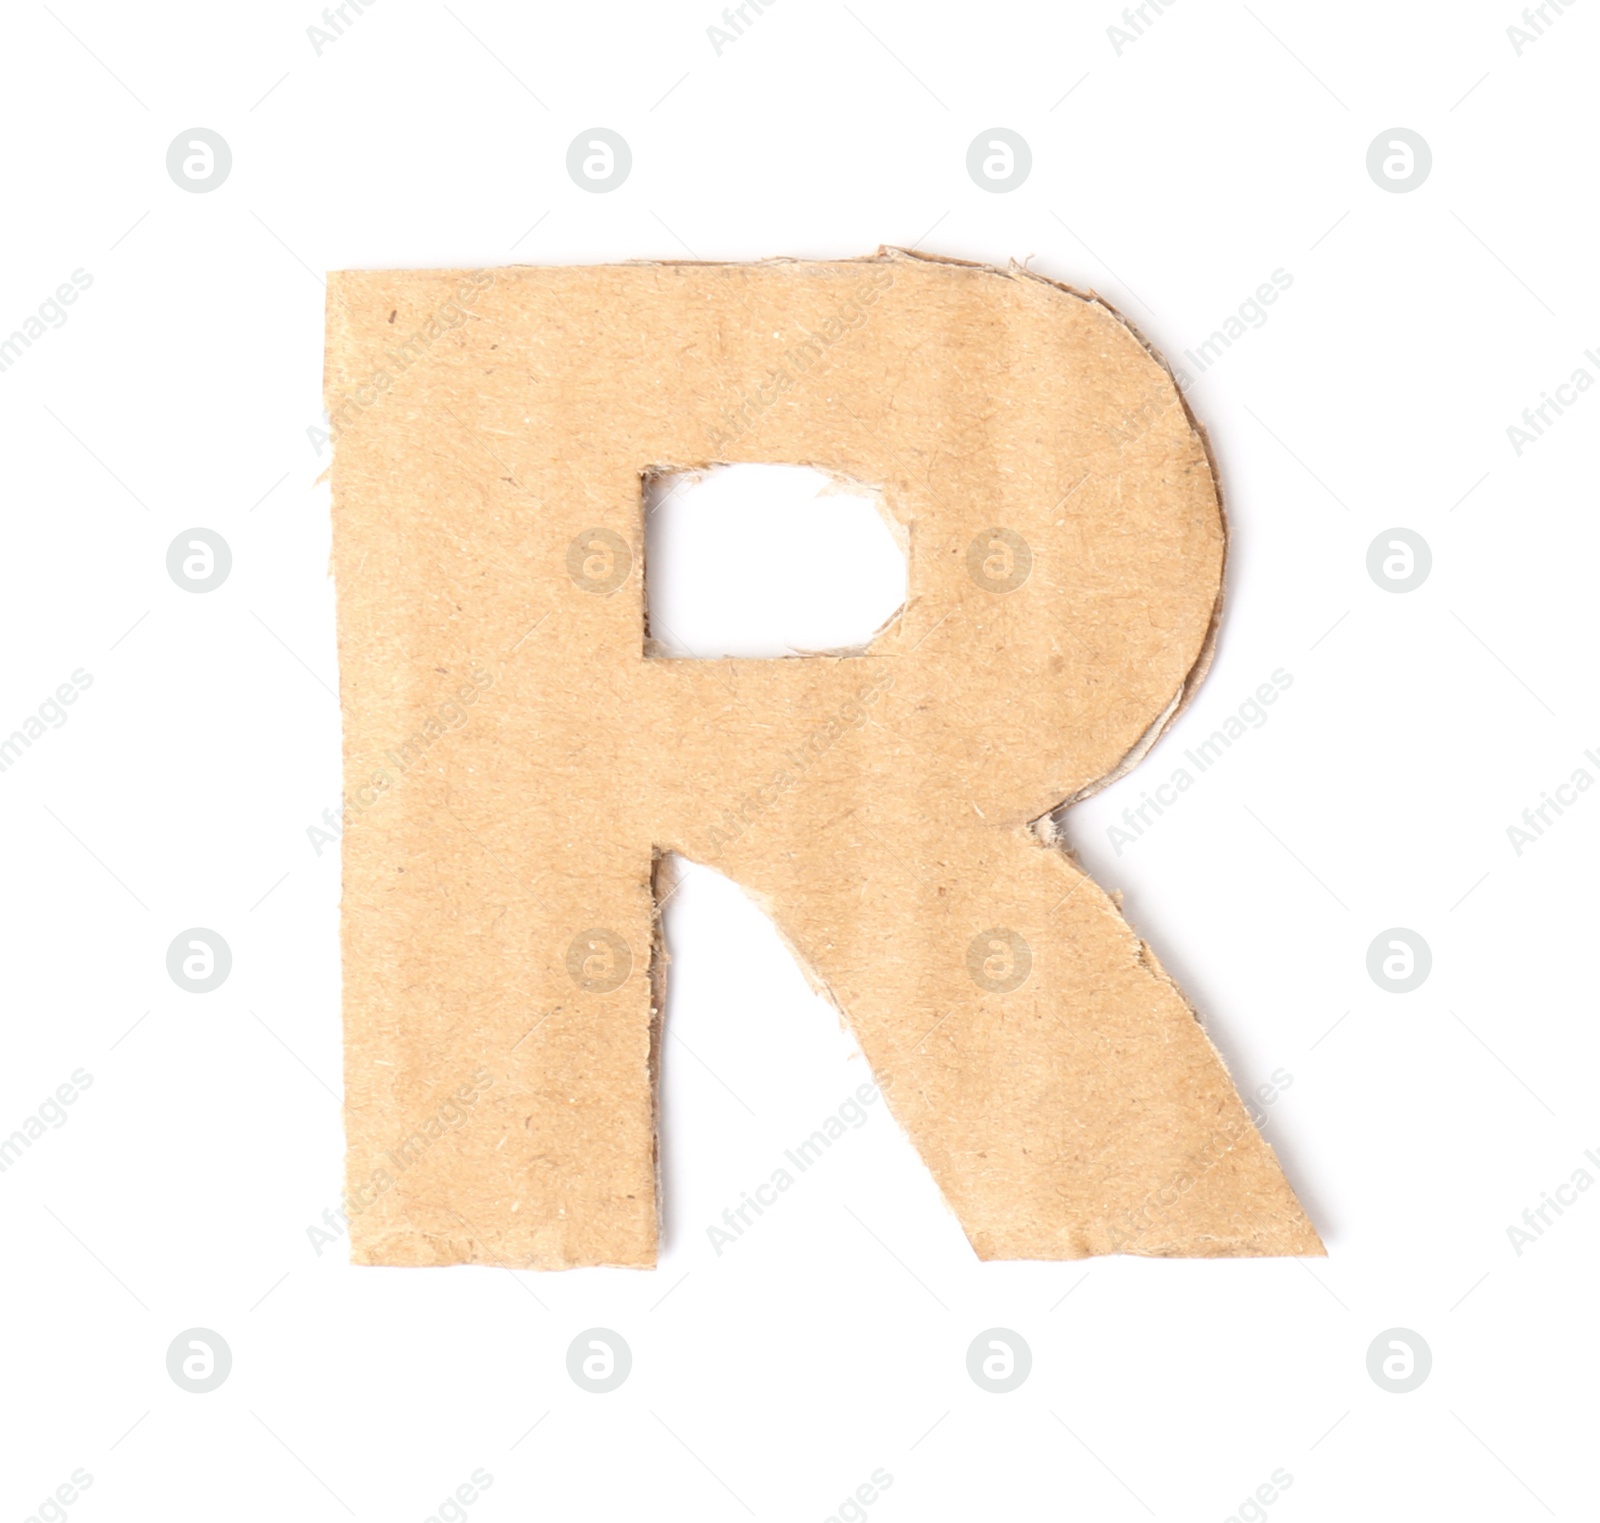 Photo of Letter R made of cardboard on white background